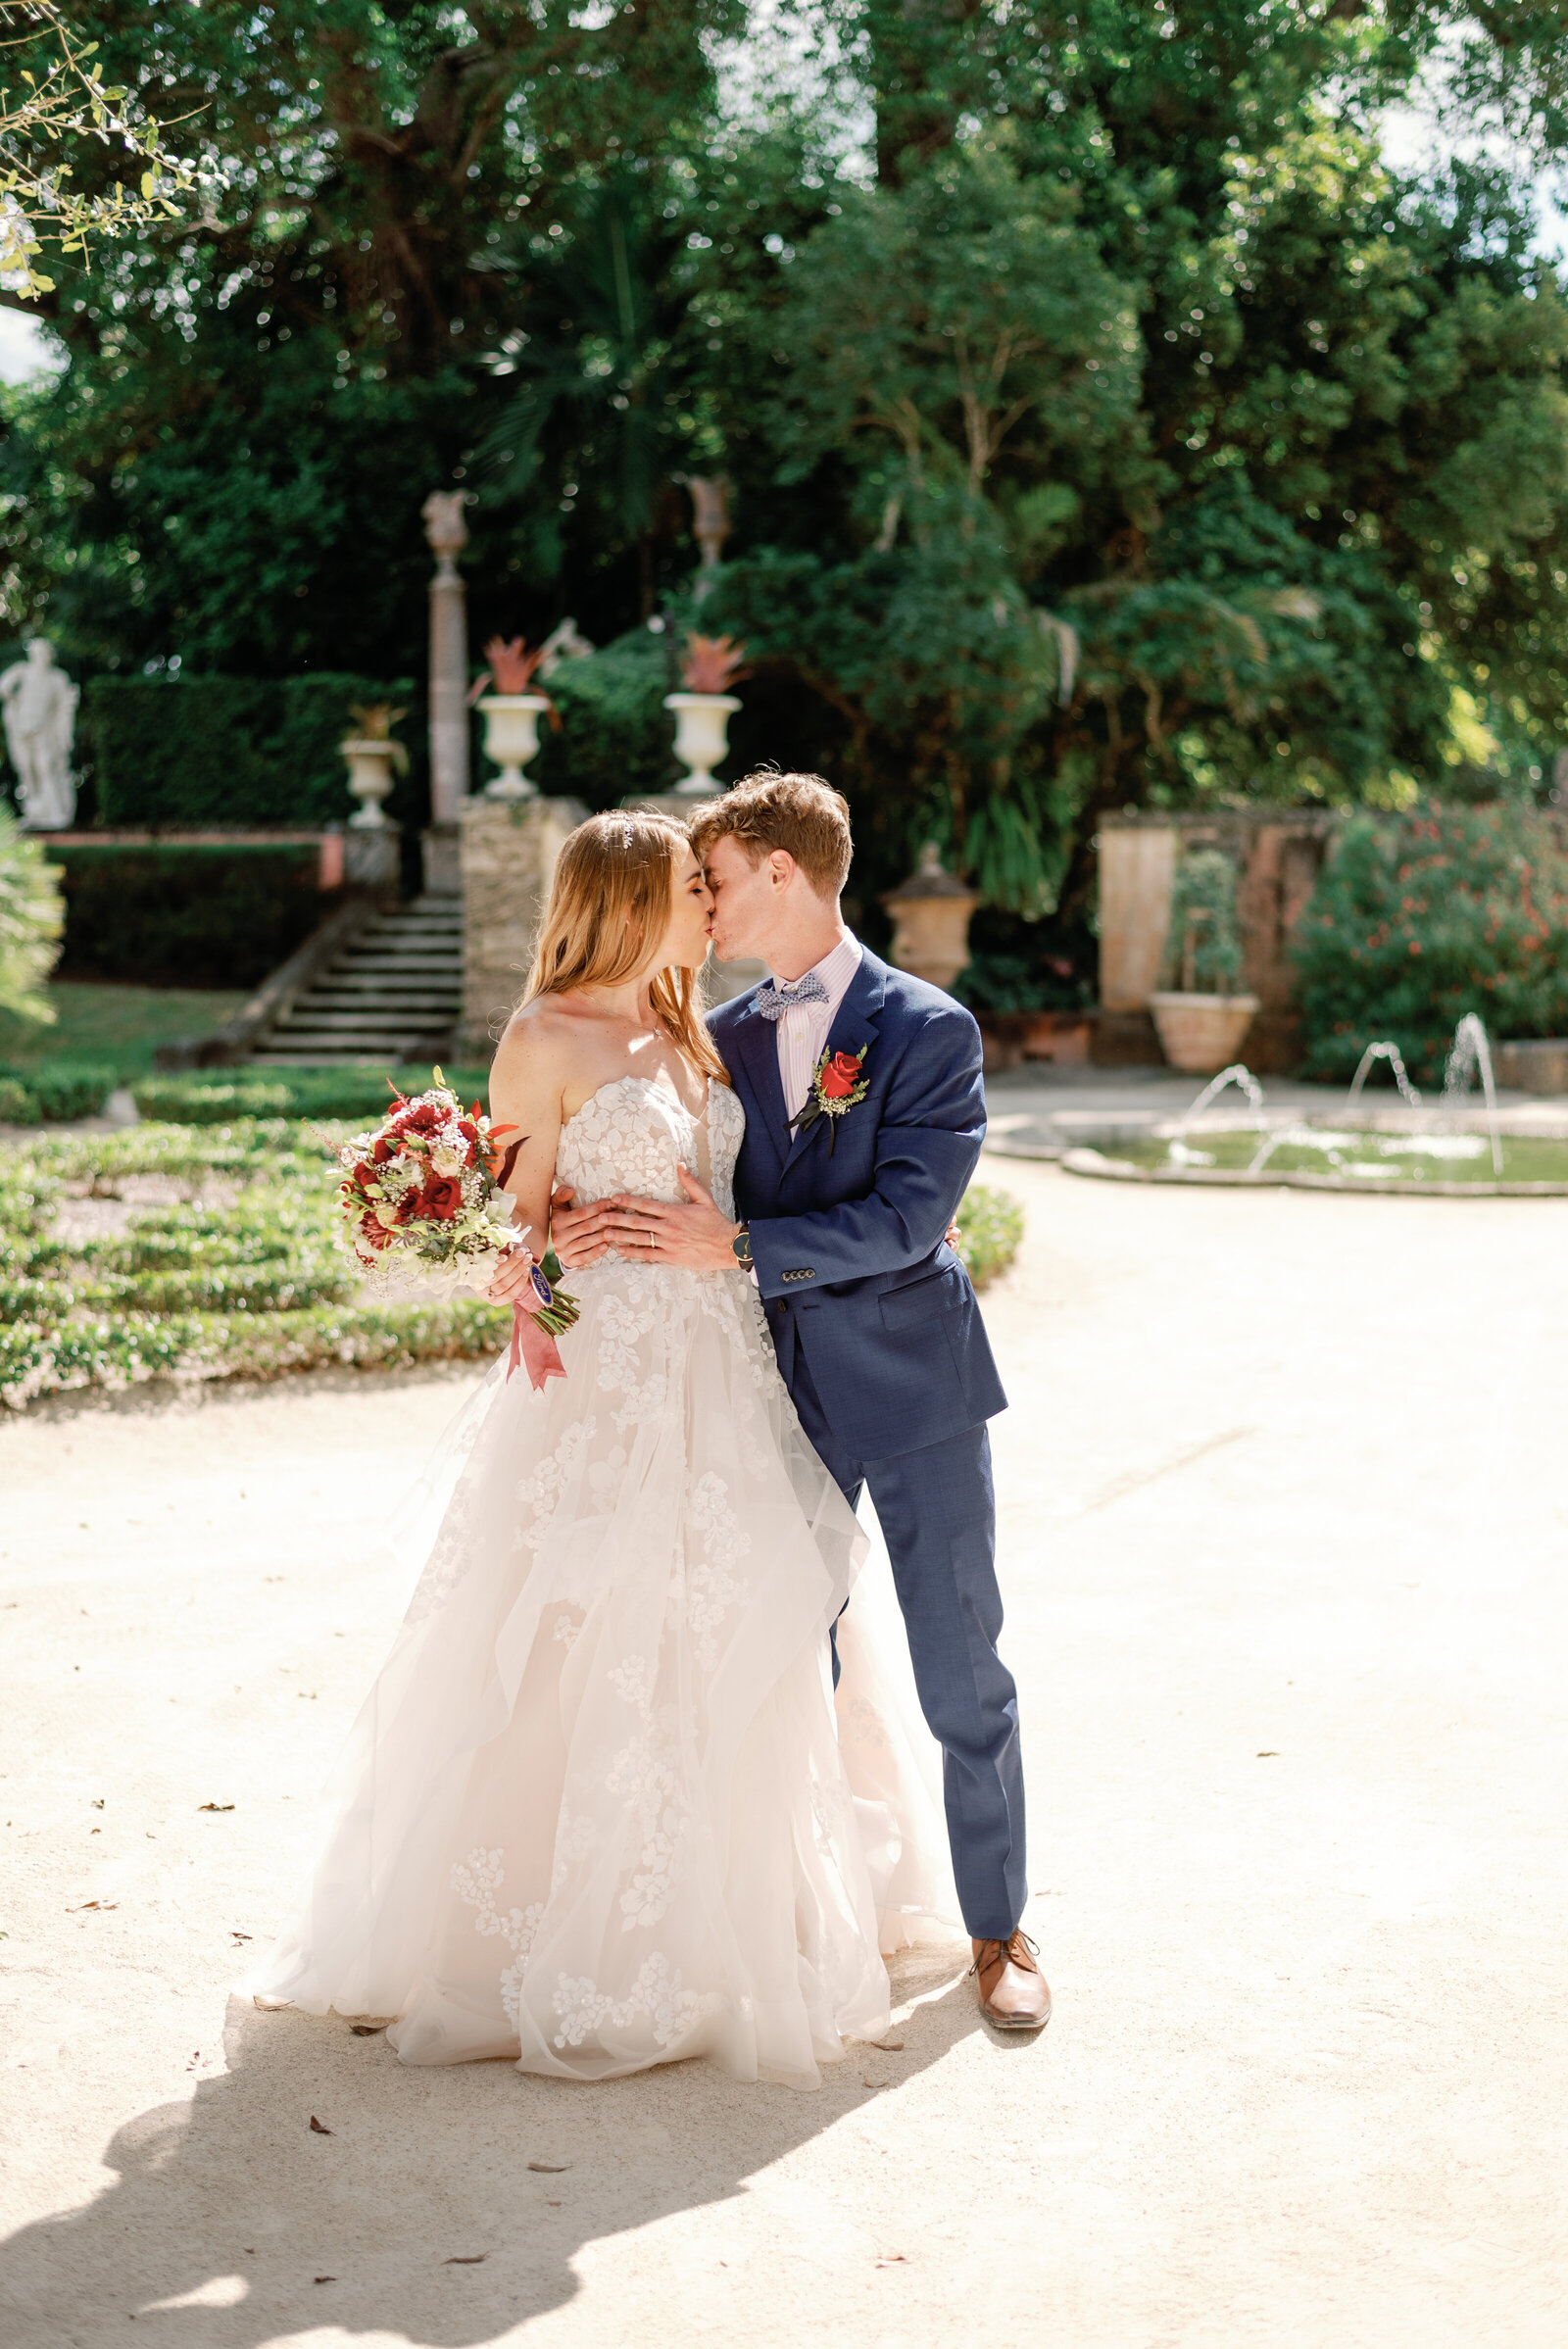 Bride and groom kissing after their wedding ceremony in Vizcaya Garden, sunlight streaming in from slightly behind them